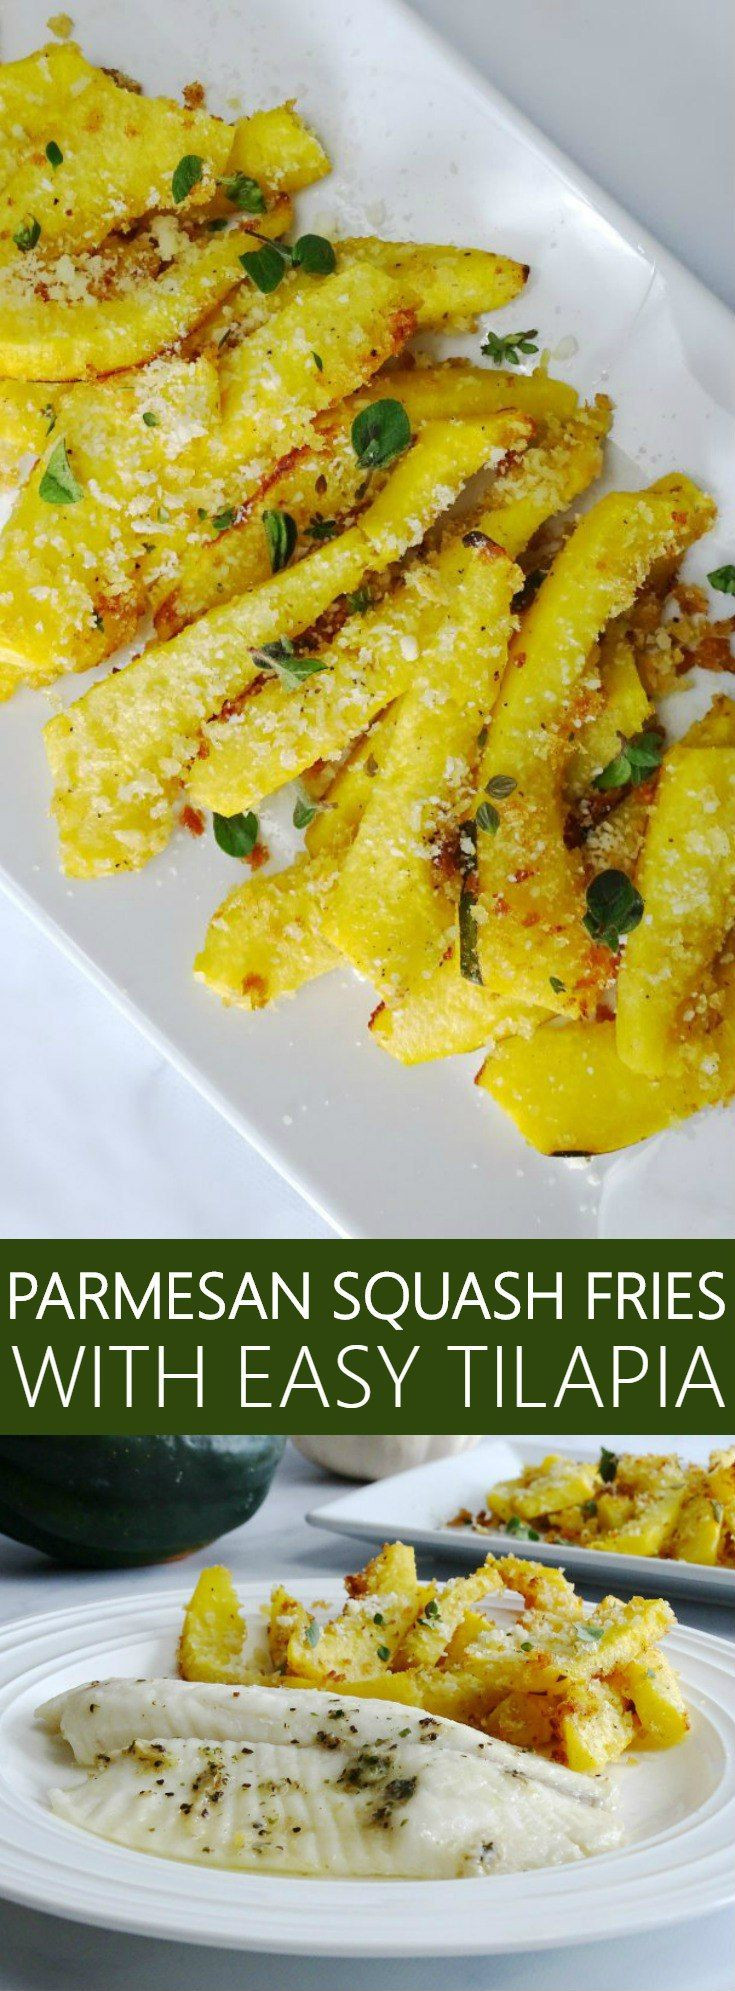 Side Dishes For Baked Tilapia
 Parmesan Squash Fries with Easy Tilapia Recipe